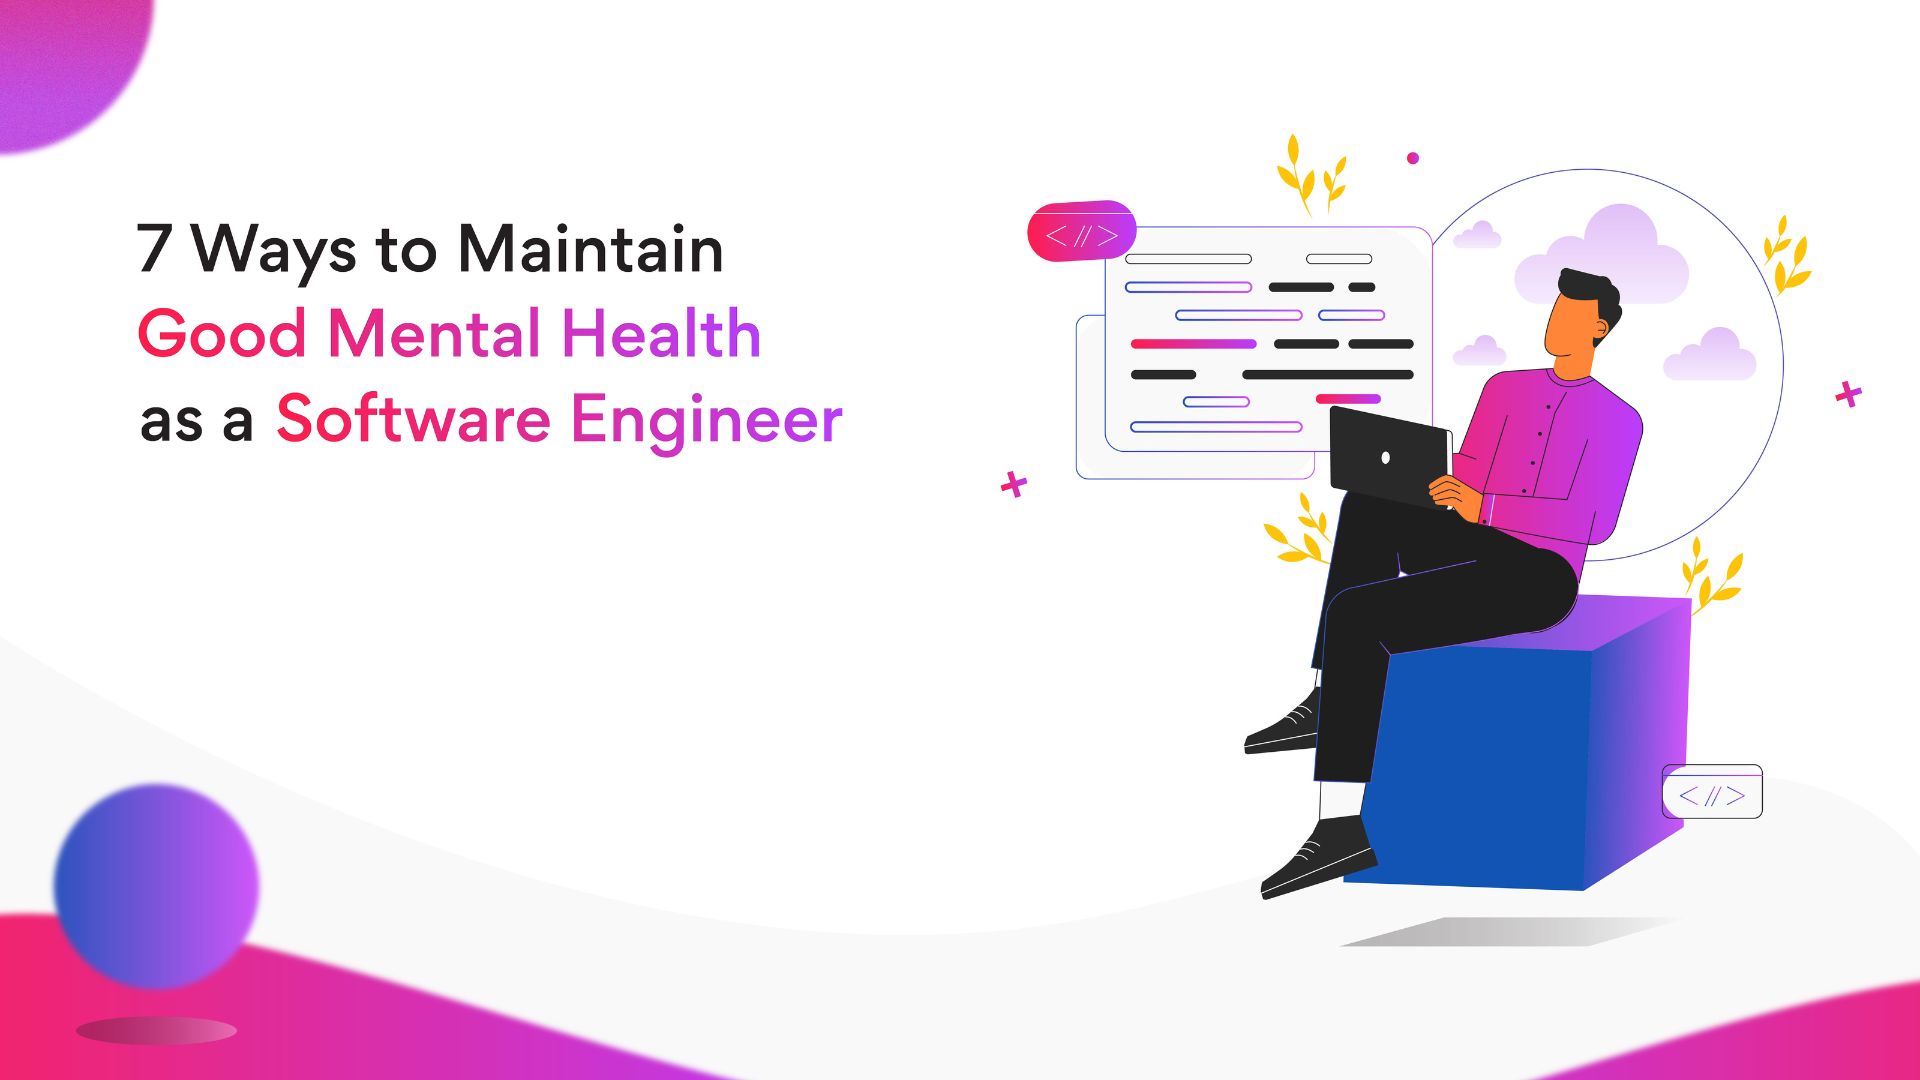 Good mental health as a software engineer